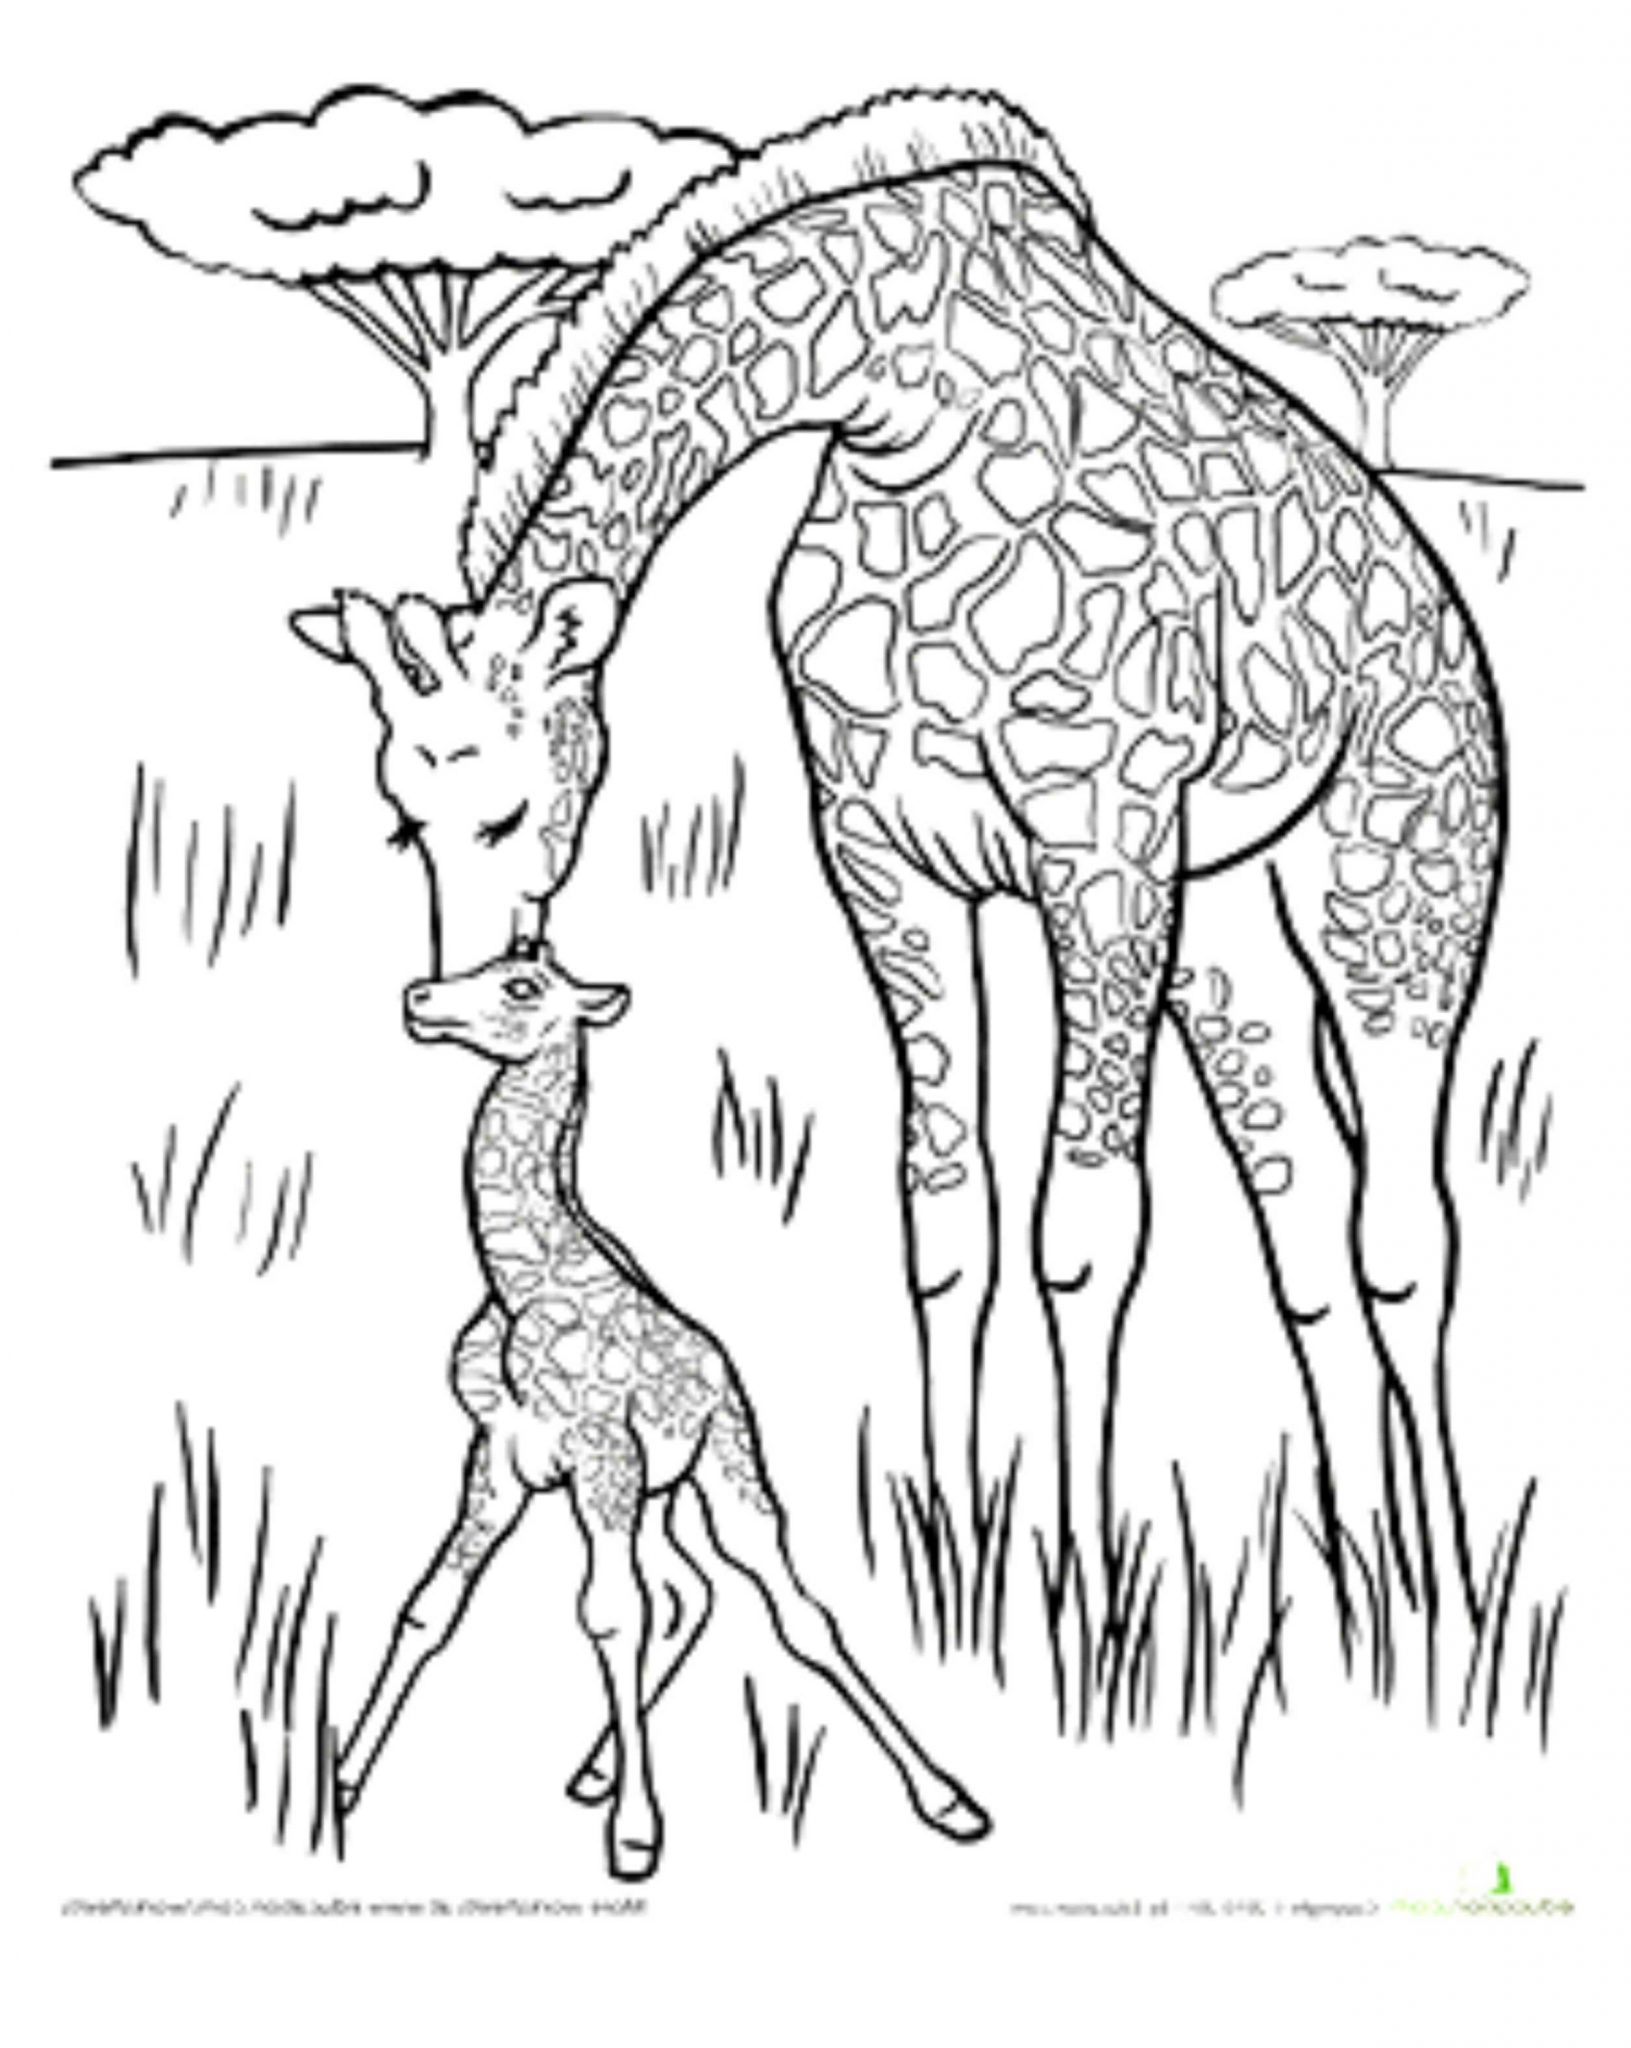 Download giraffe-coloring-pages-printable | | BestAppsForKids.com